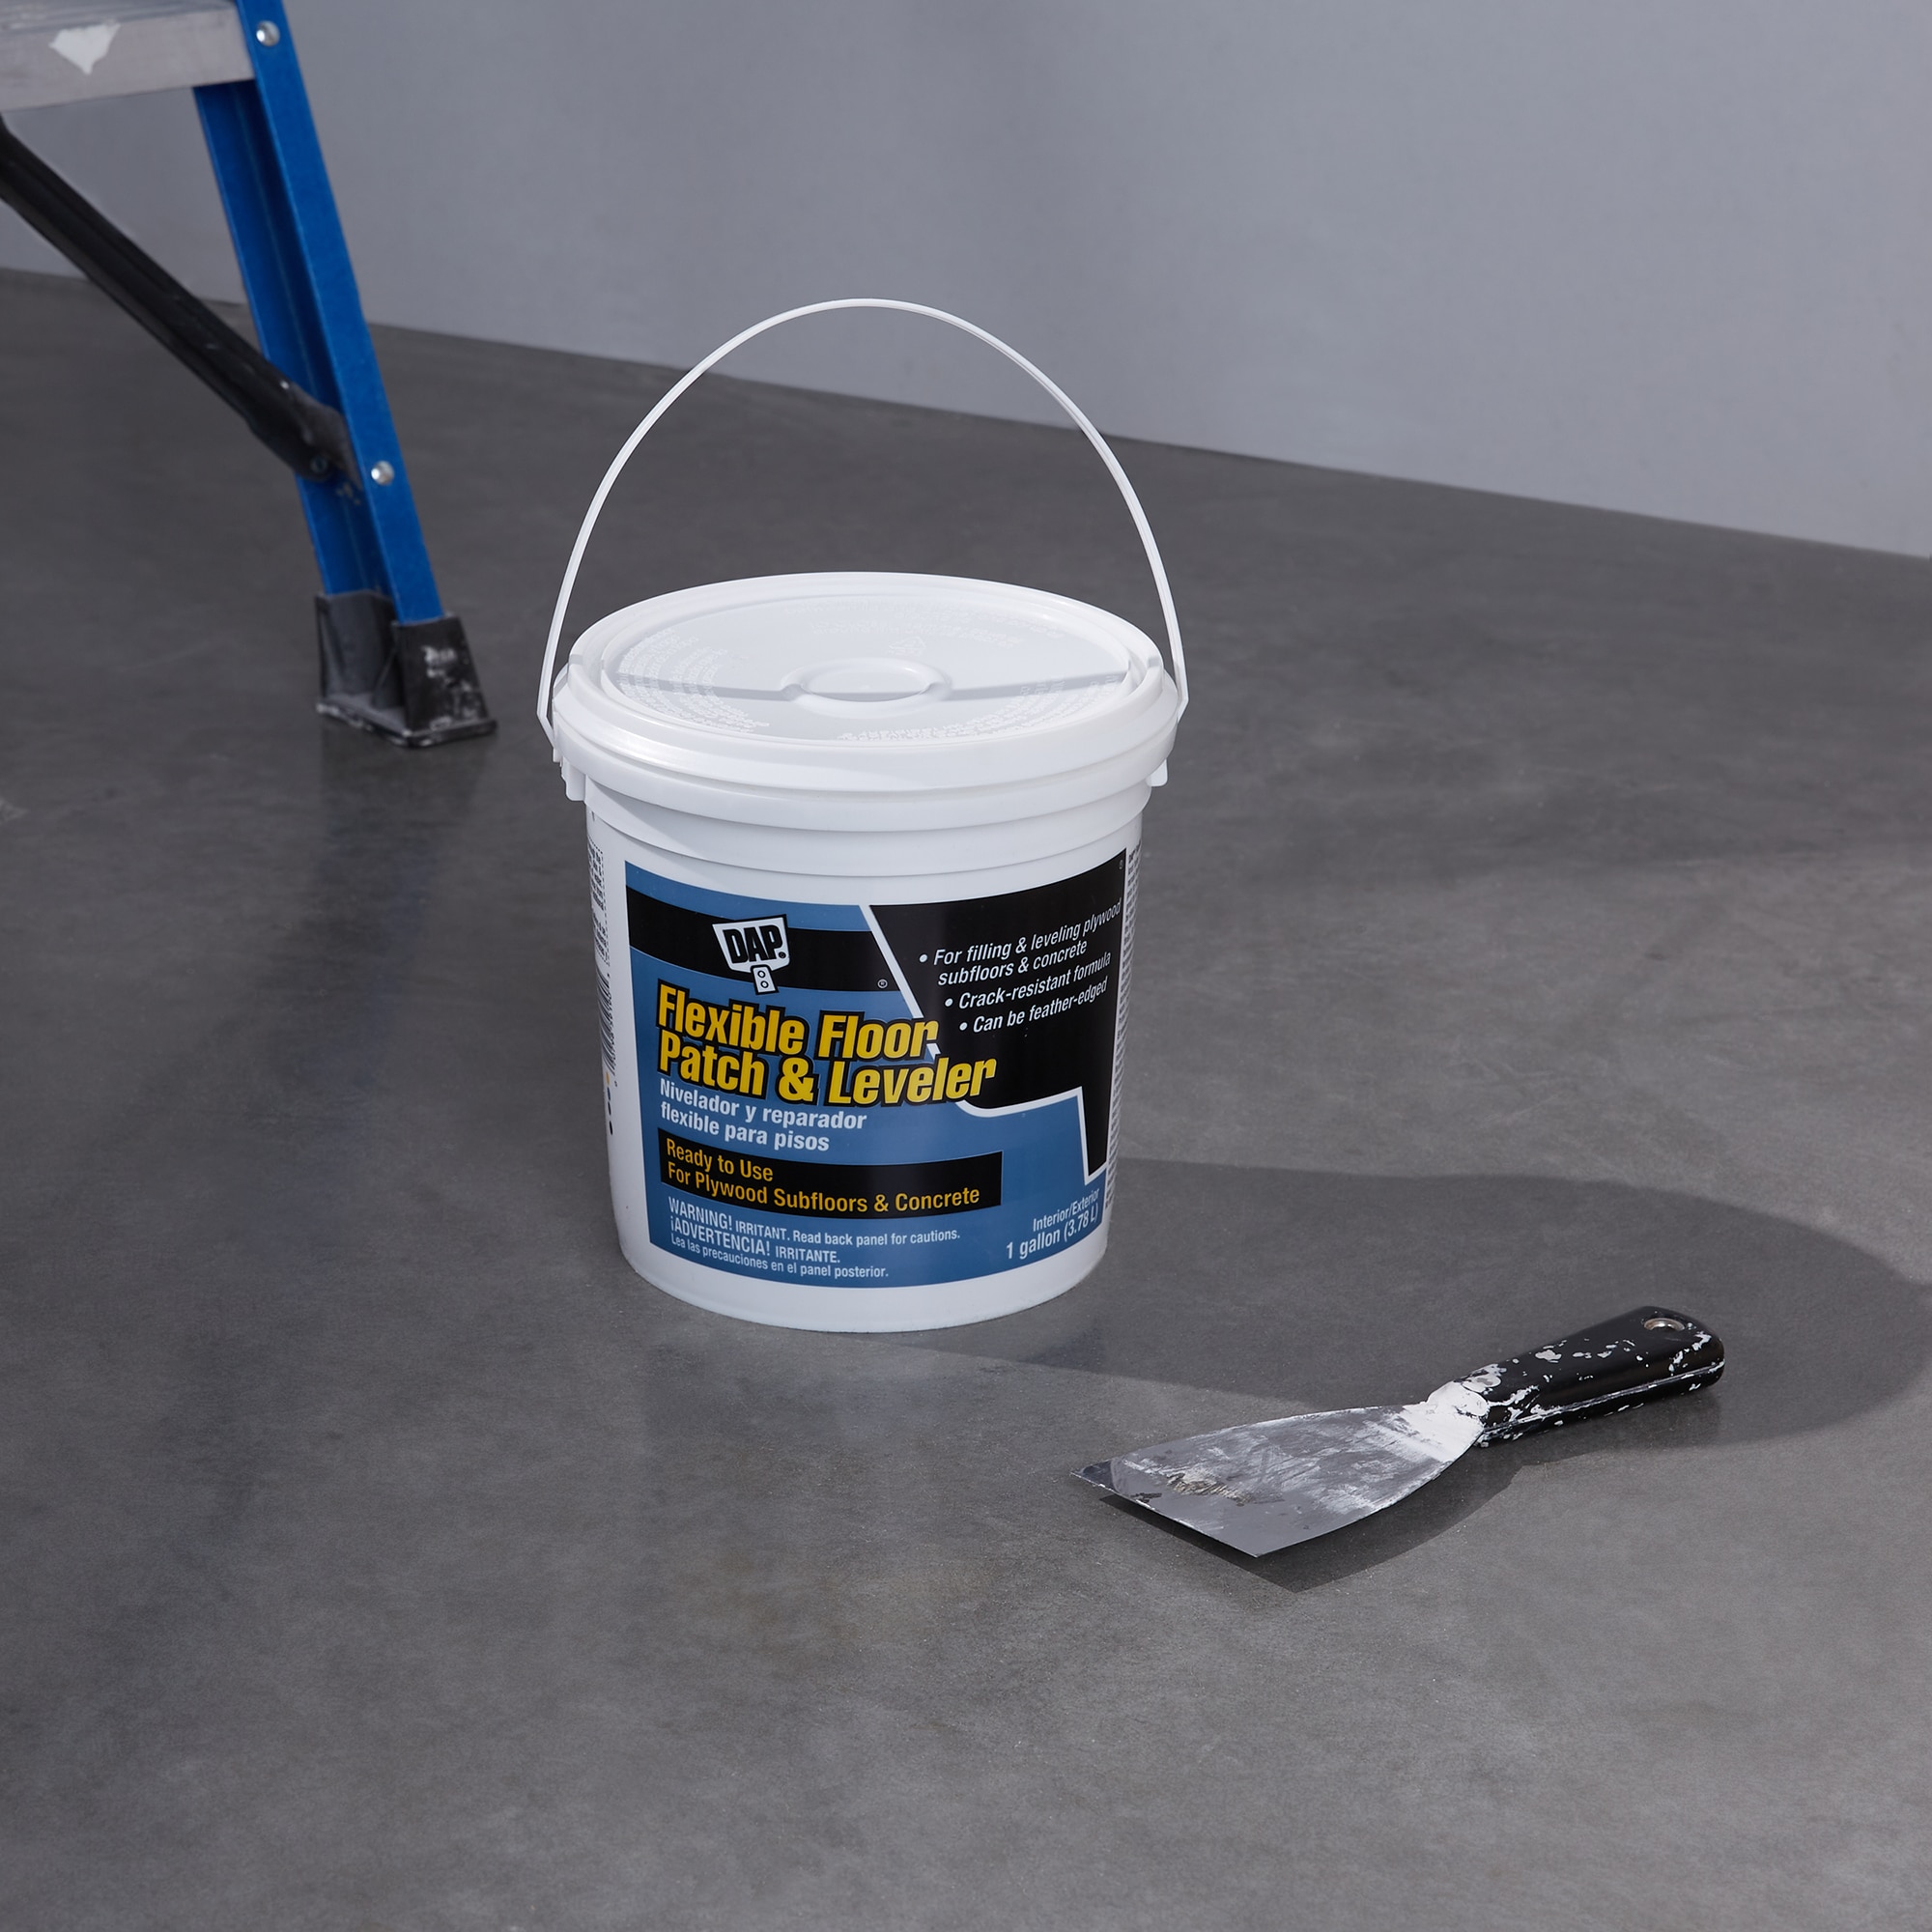 Dap Flexible Floor Patch And Leveler 128 Oz Waterproof Interior Exterior Gray Patching Compound In The Kling Department At Lowes Com